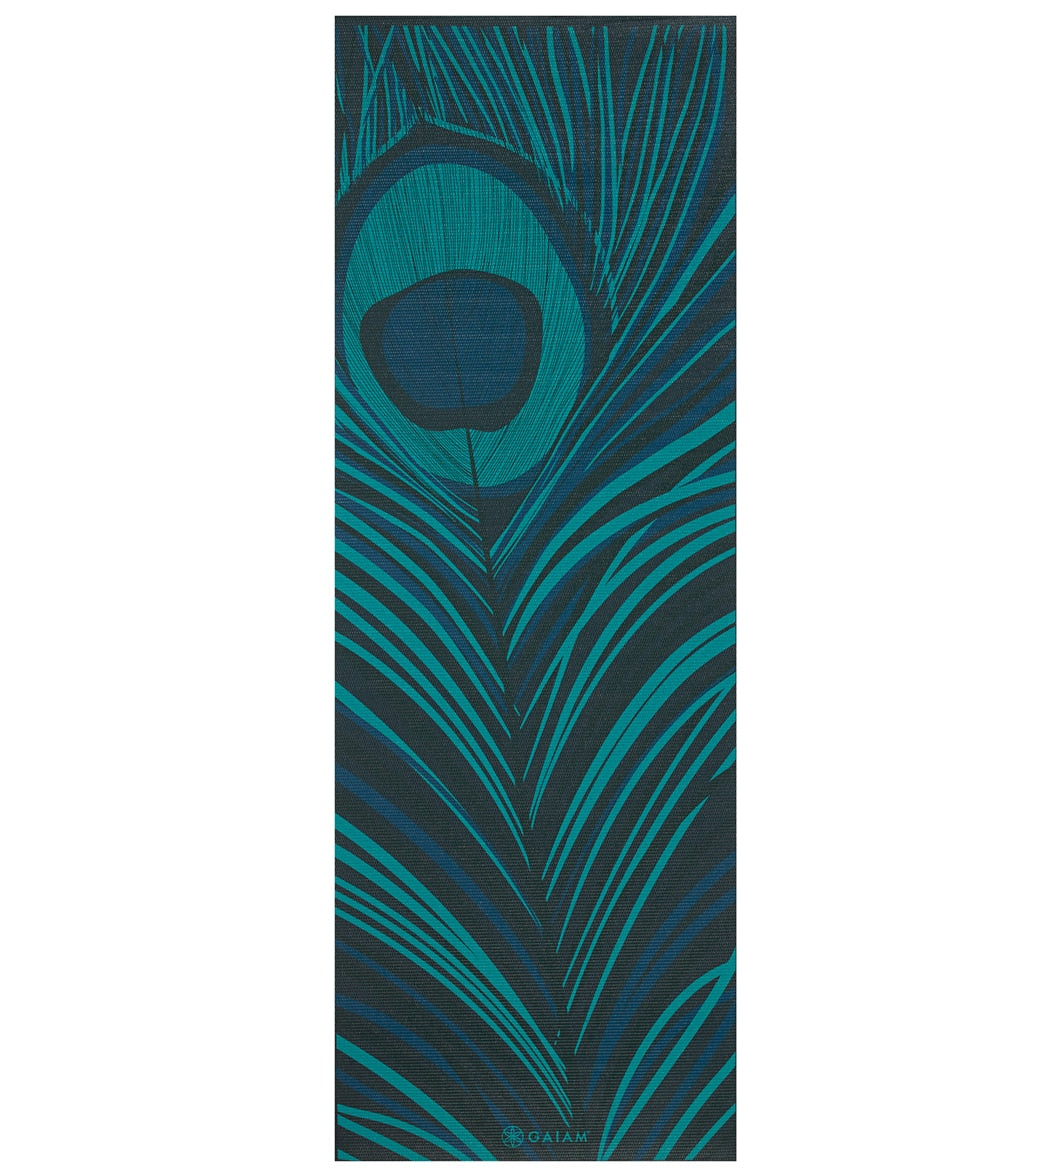 Gaiam Reversible Yoga Mat - health and beauty - by owner